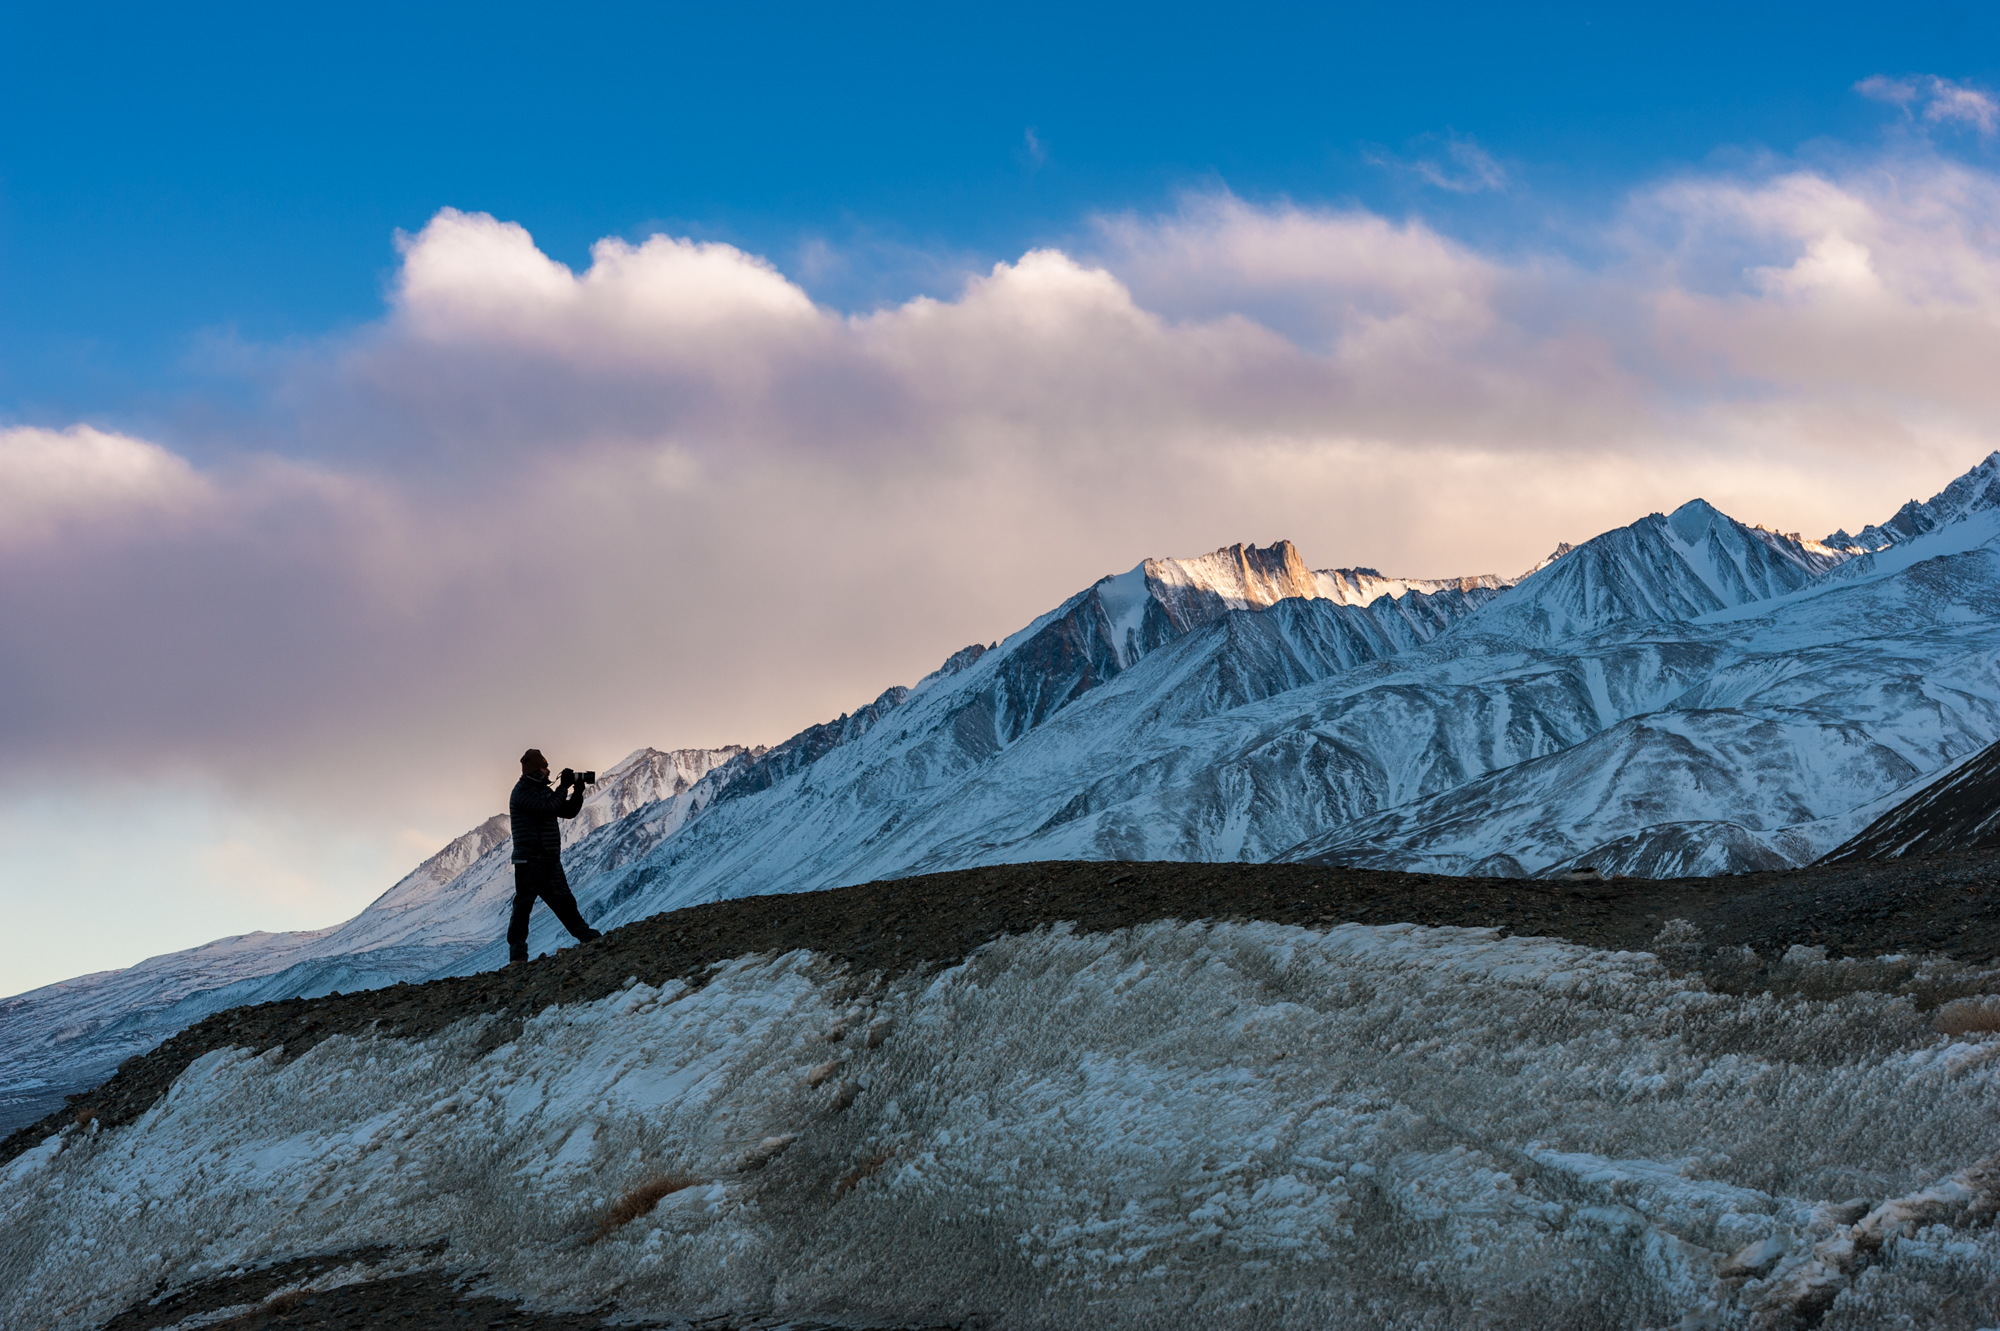 Photo tour and workshop at Ladakh in Winter